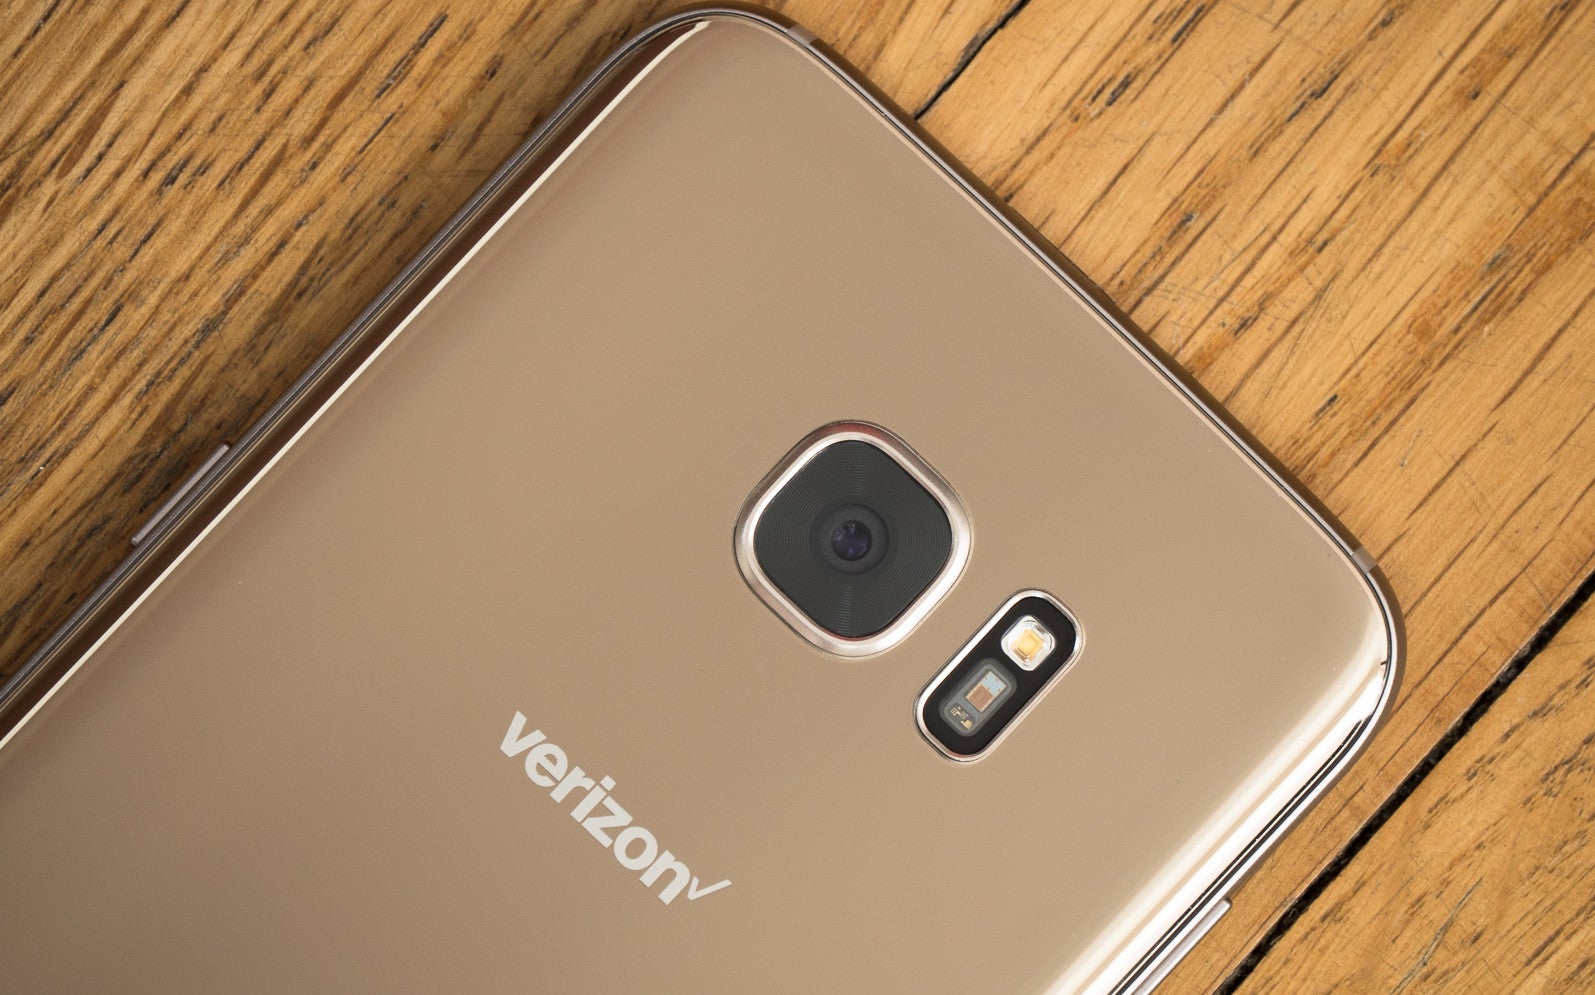 Verizon updates the Galaxy S7 and S7 edge with One Talk support